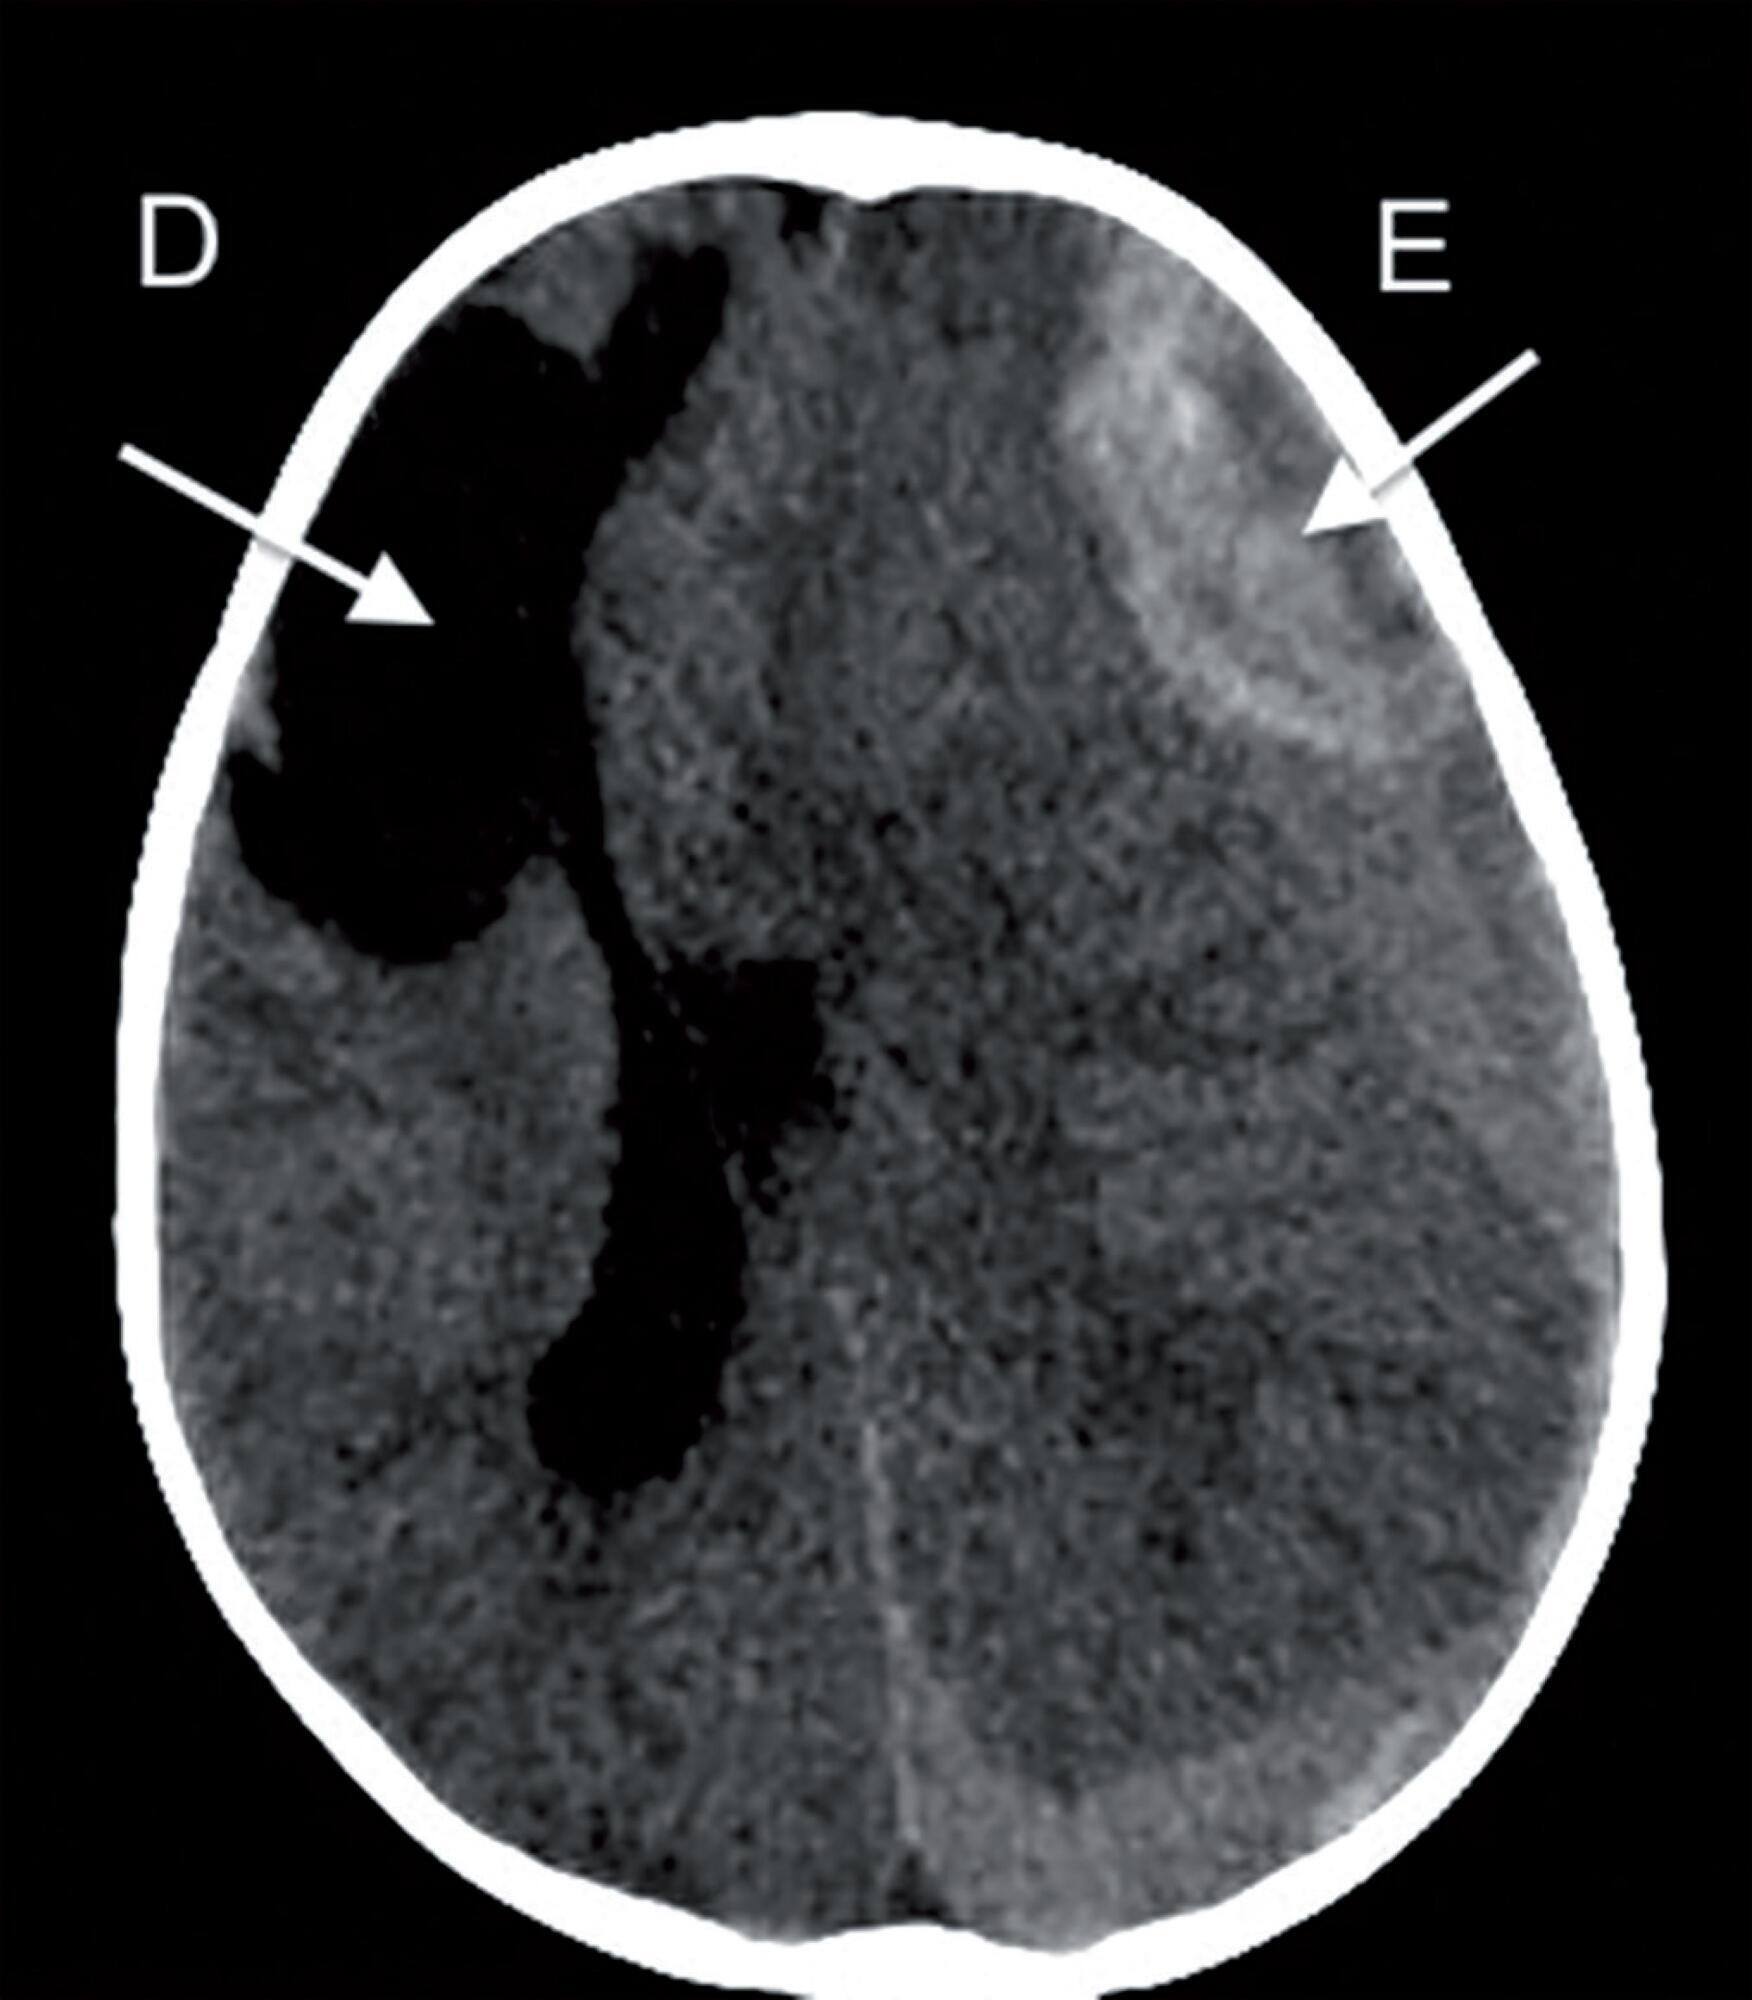 Spontaneous intracranial hemorrhage in children: report of a hemophilia patient who survived due to a brain cyst